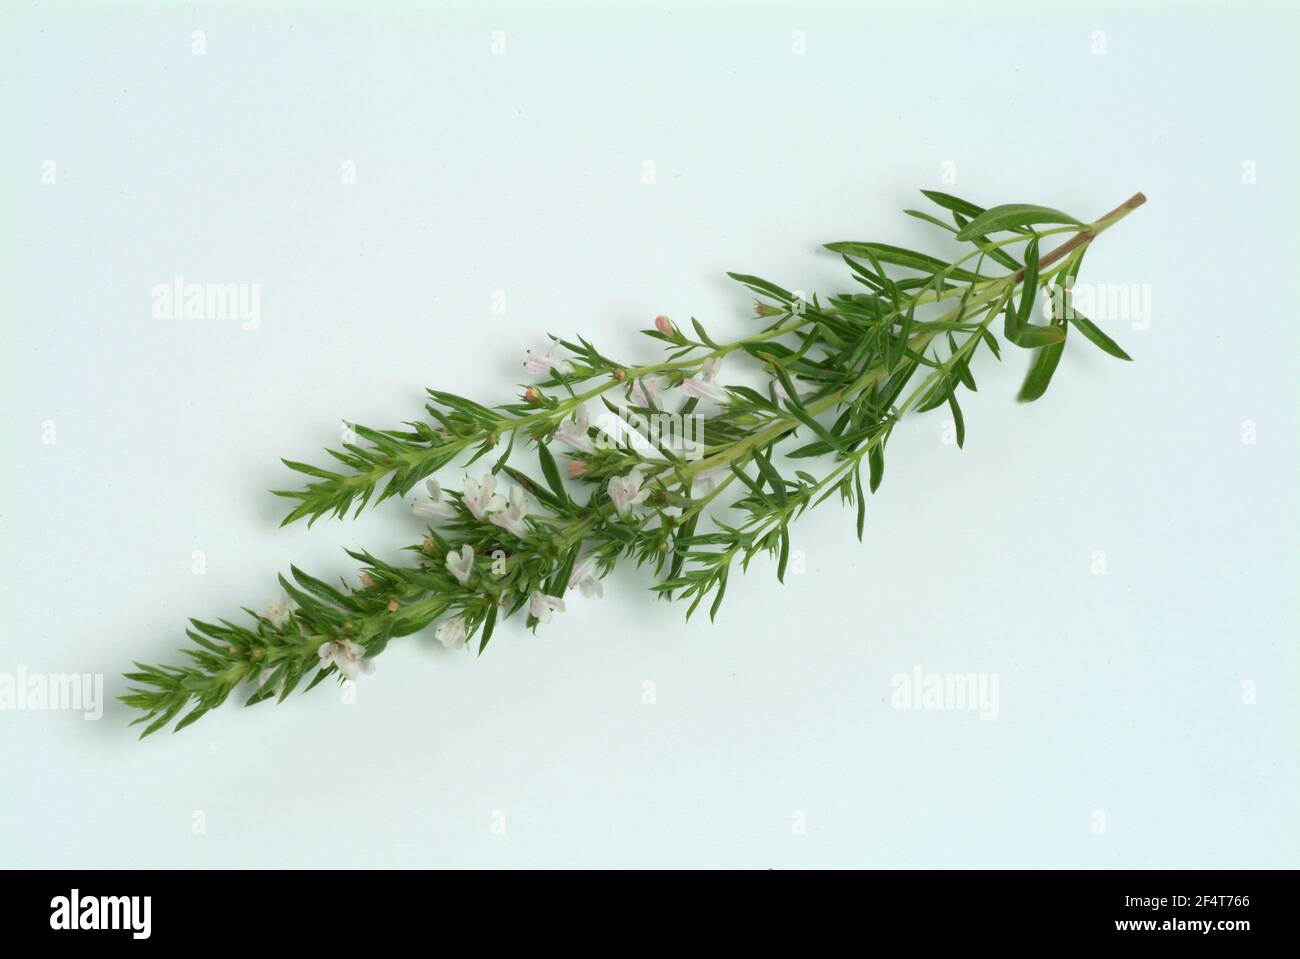 Summer savory, Satureja hortensis, also garden savory, true savory, pepperwort, family of the labiates, used since ancient times as a medicinal and sp Stock Photo